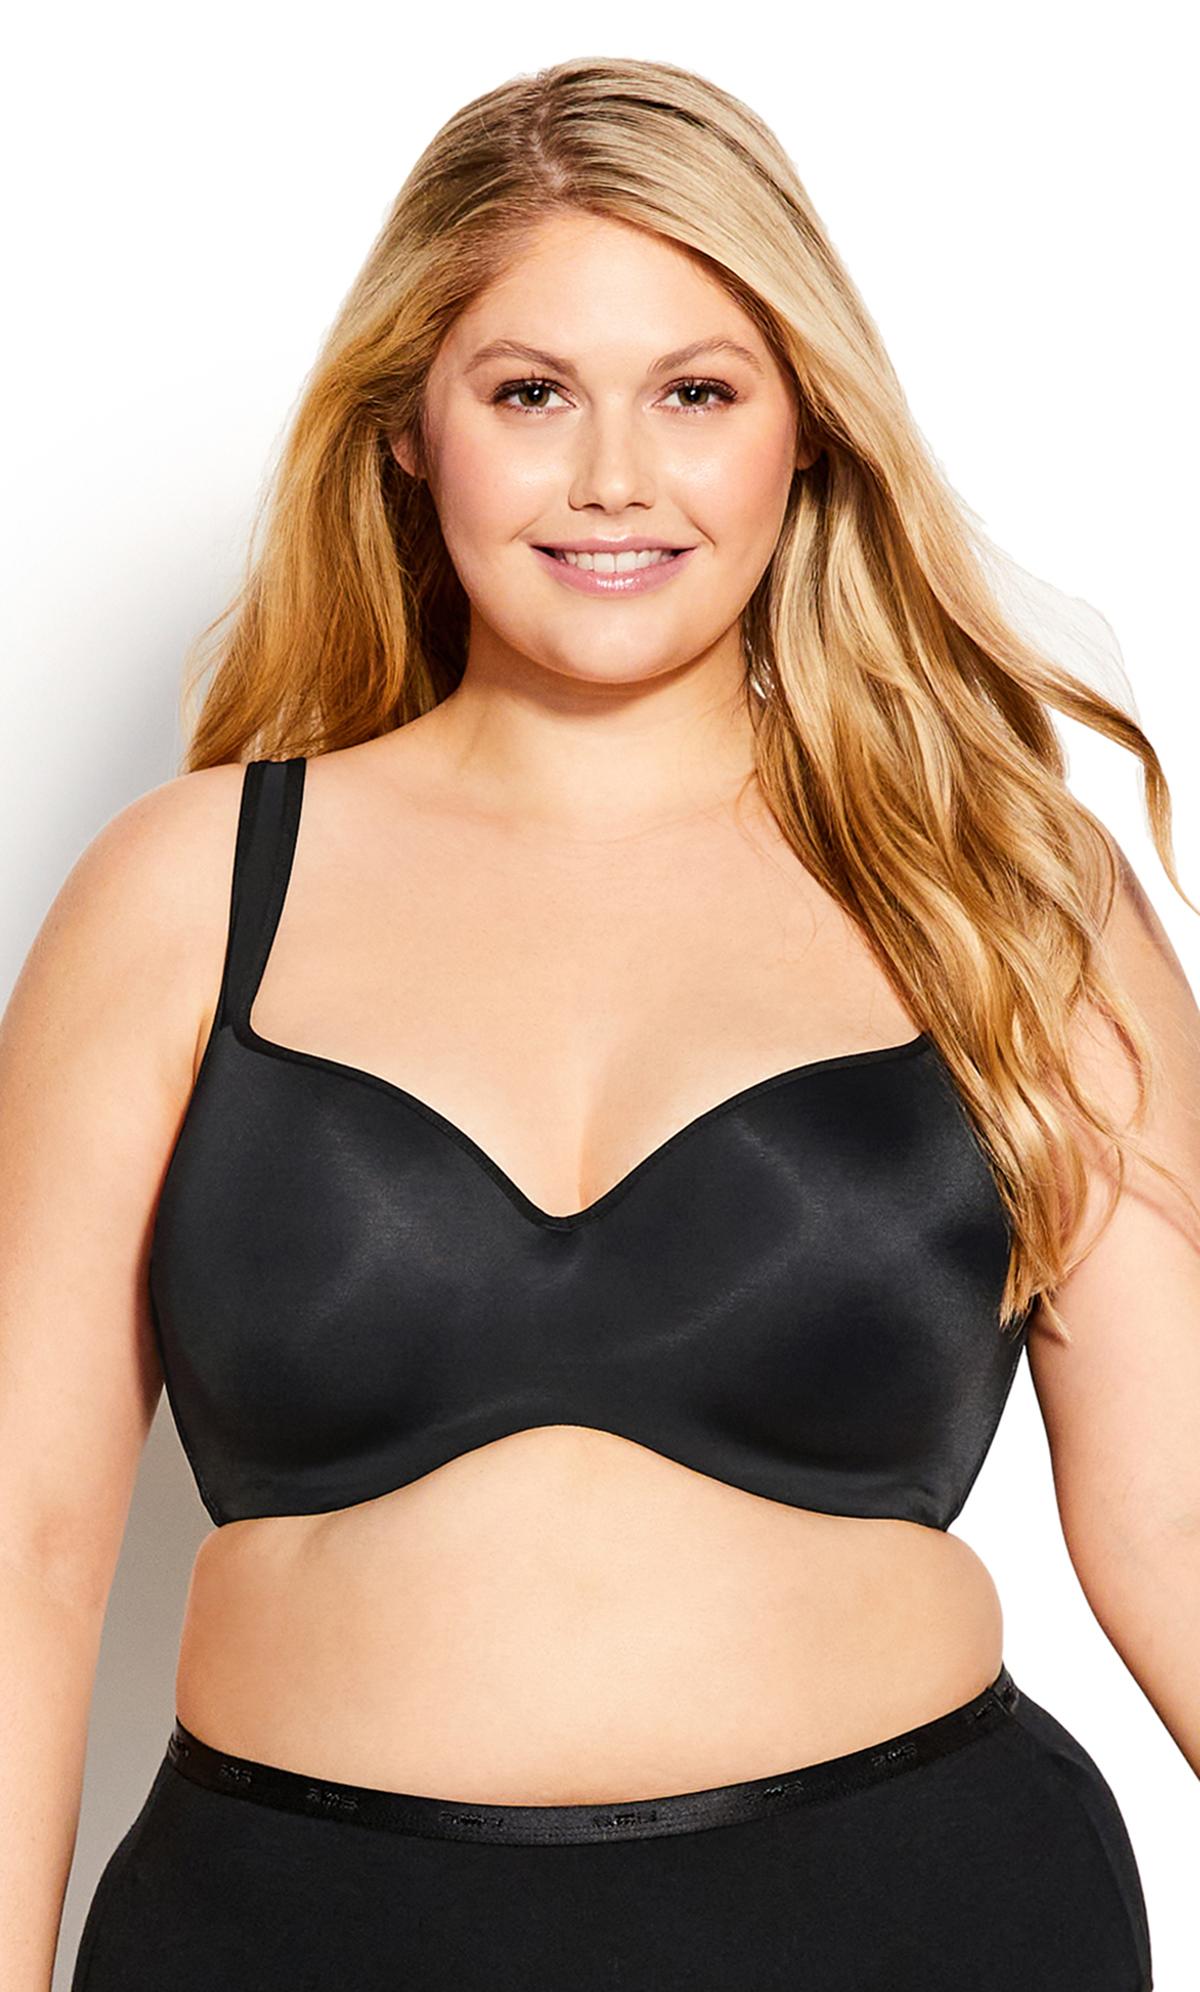 Basic Balconette Bra Black Contouring Concealed Underwire Mesh Stretch Supportive 1